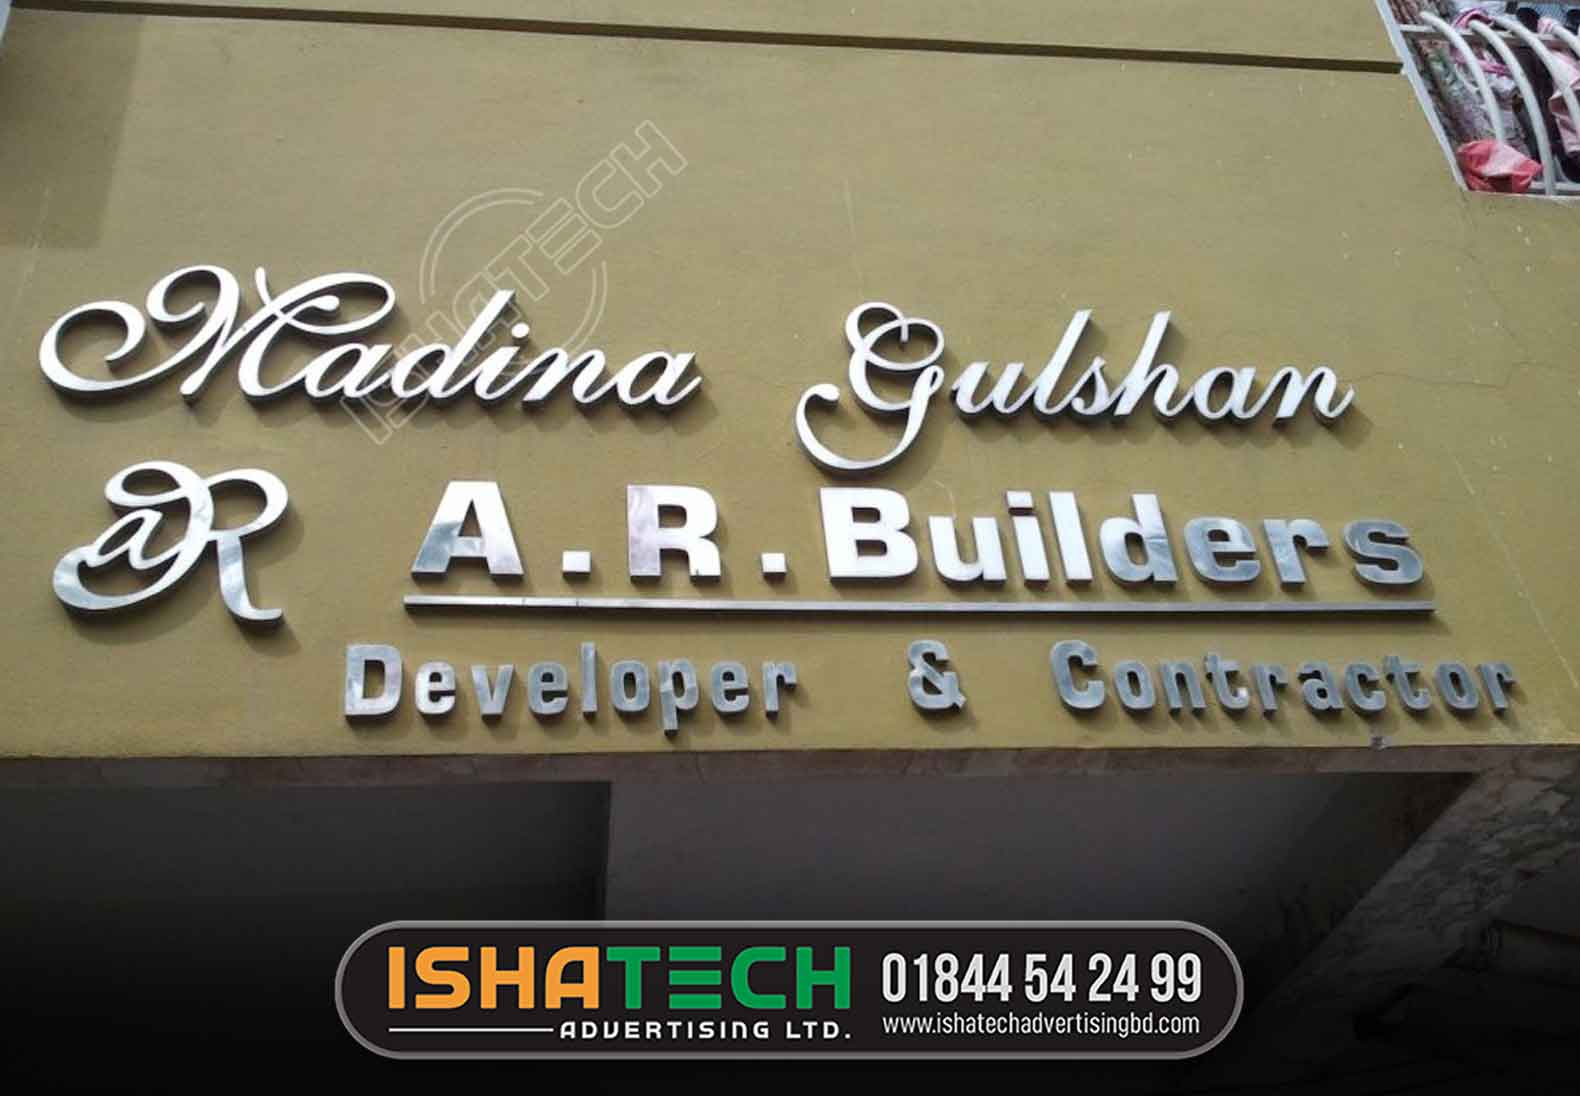 Madina Gulshan SS NAMEPLATE, A.R. BUILDERS AND DEVELOPER OR CONSTRUCTOR COMPANY NAMEPLATE SUPPLIER AND MAKER IN DHAKA BD